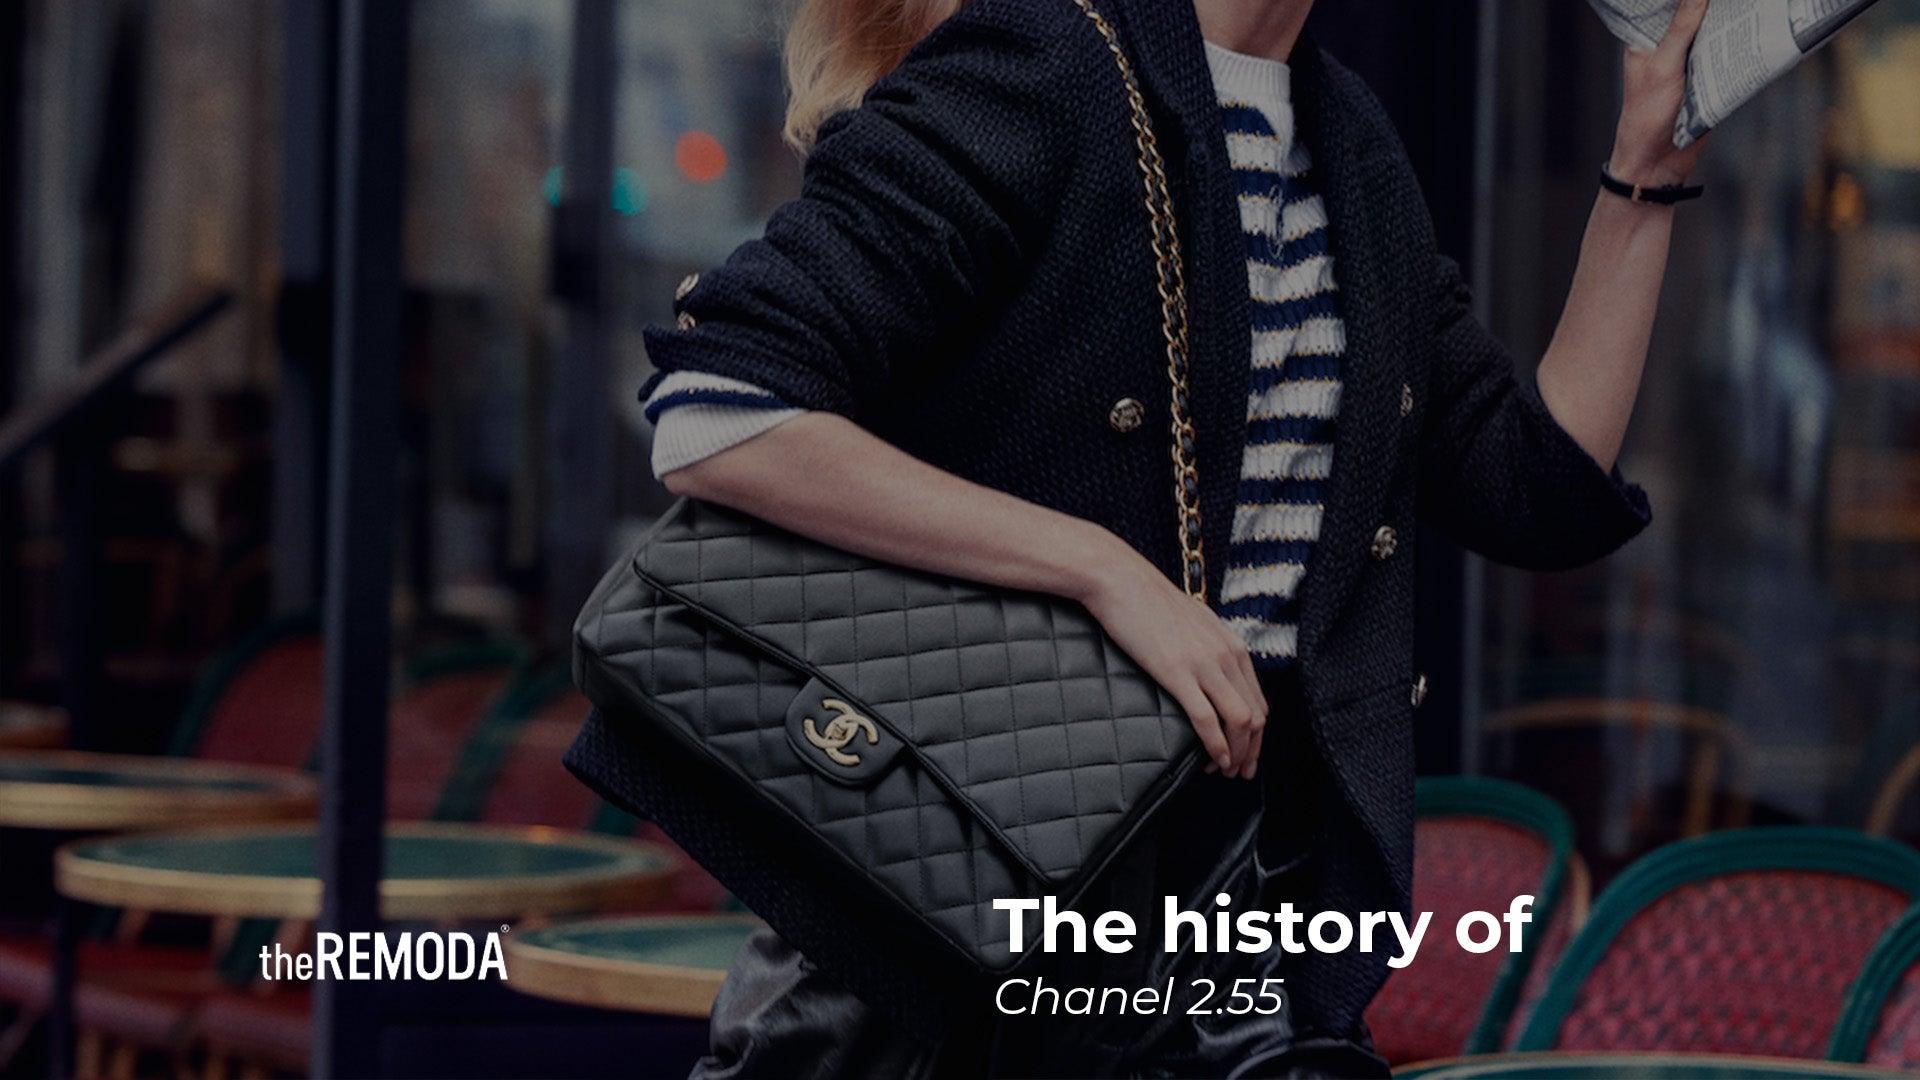 The history of Chanel 2.55 - theREMODA